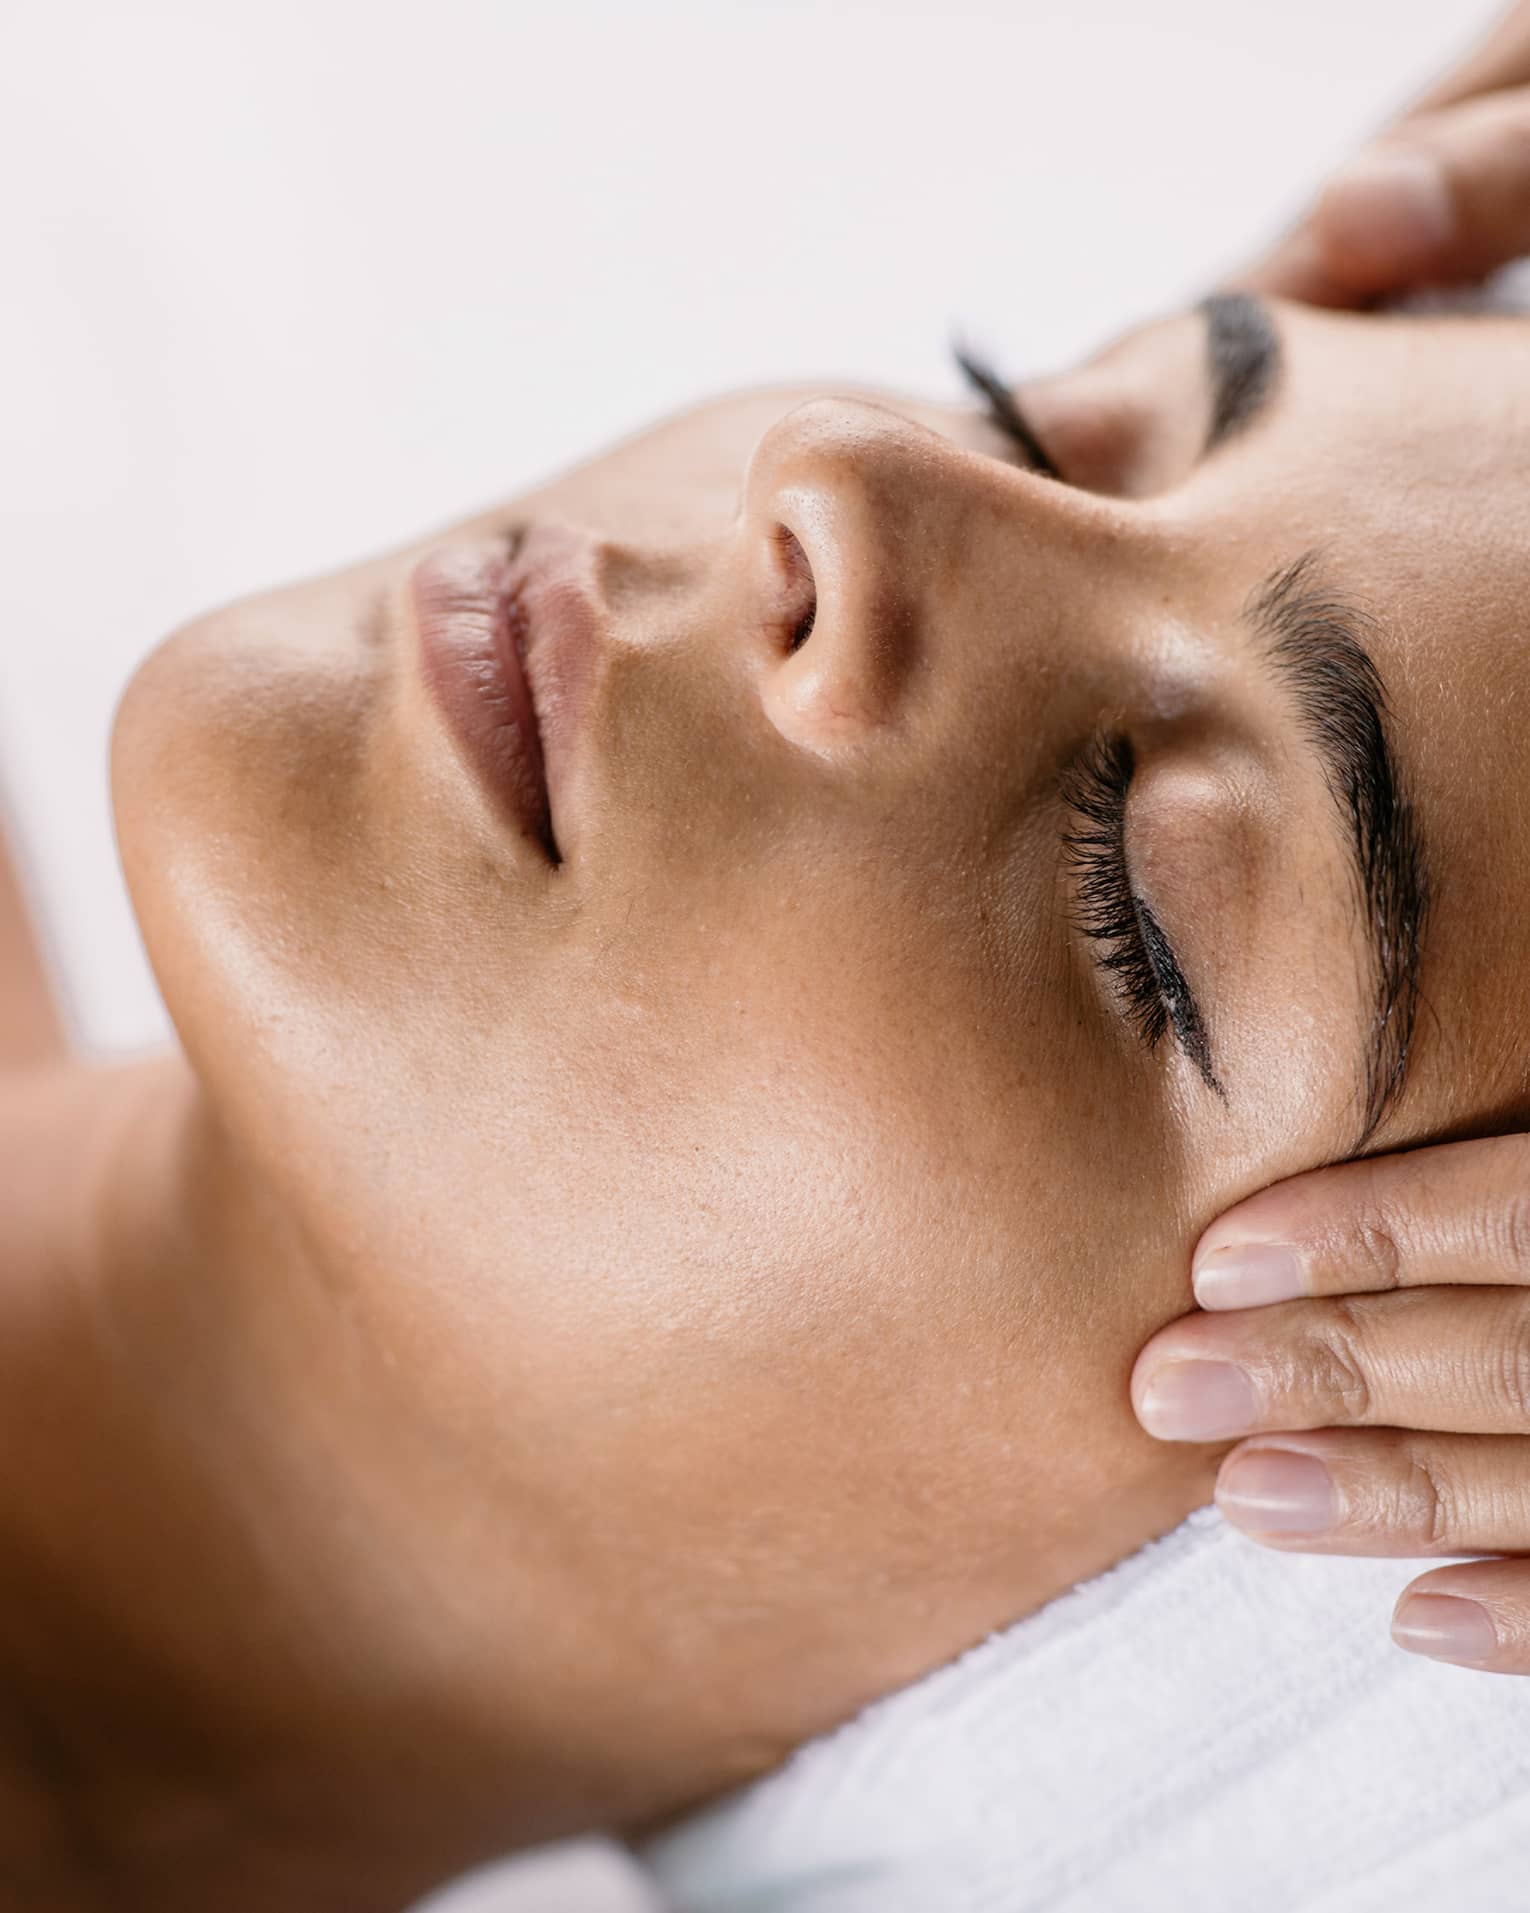 Hands massage woman's temples as she closes her eyes, spa towel around hair